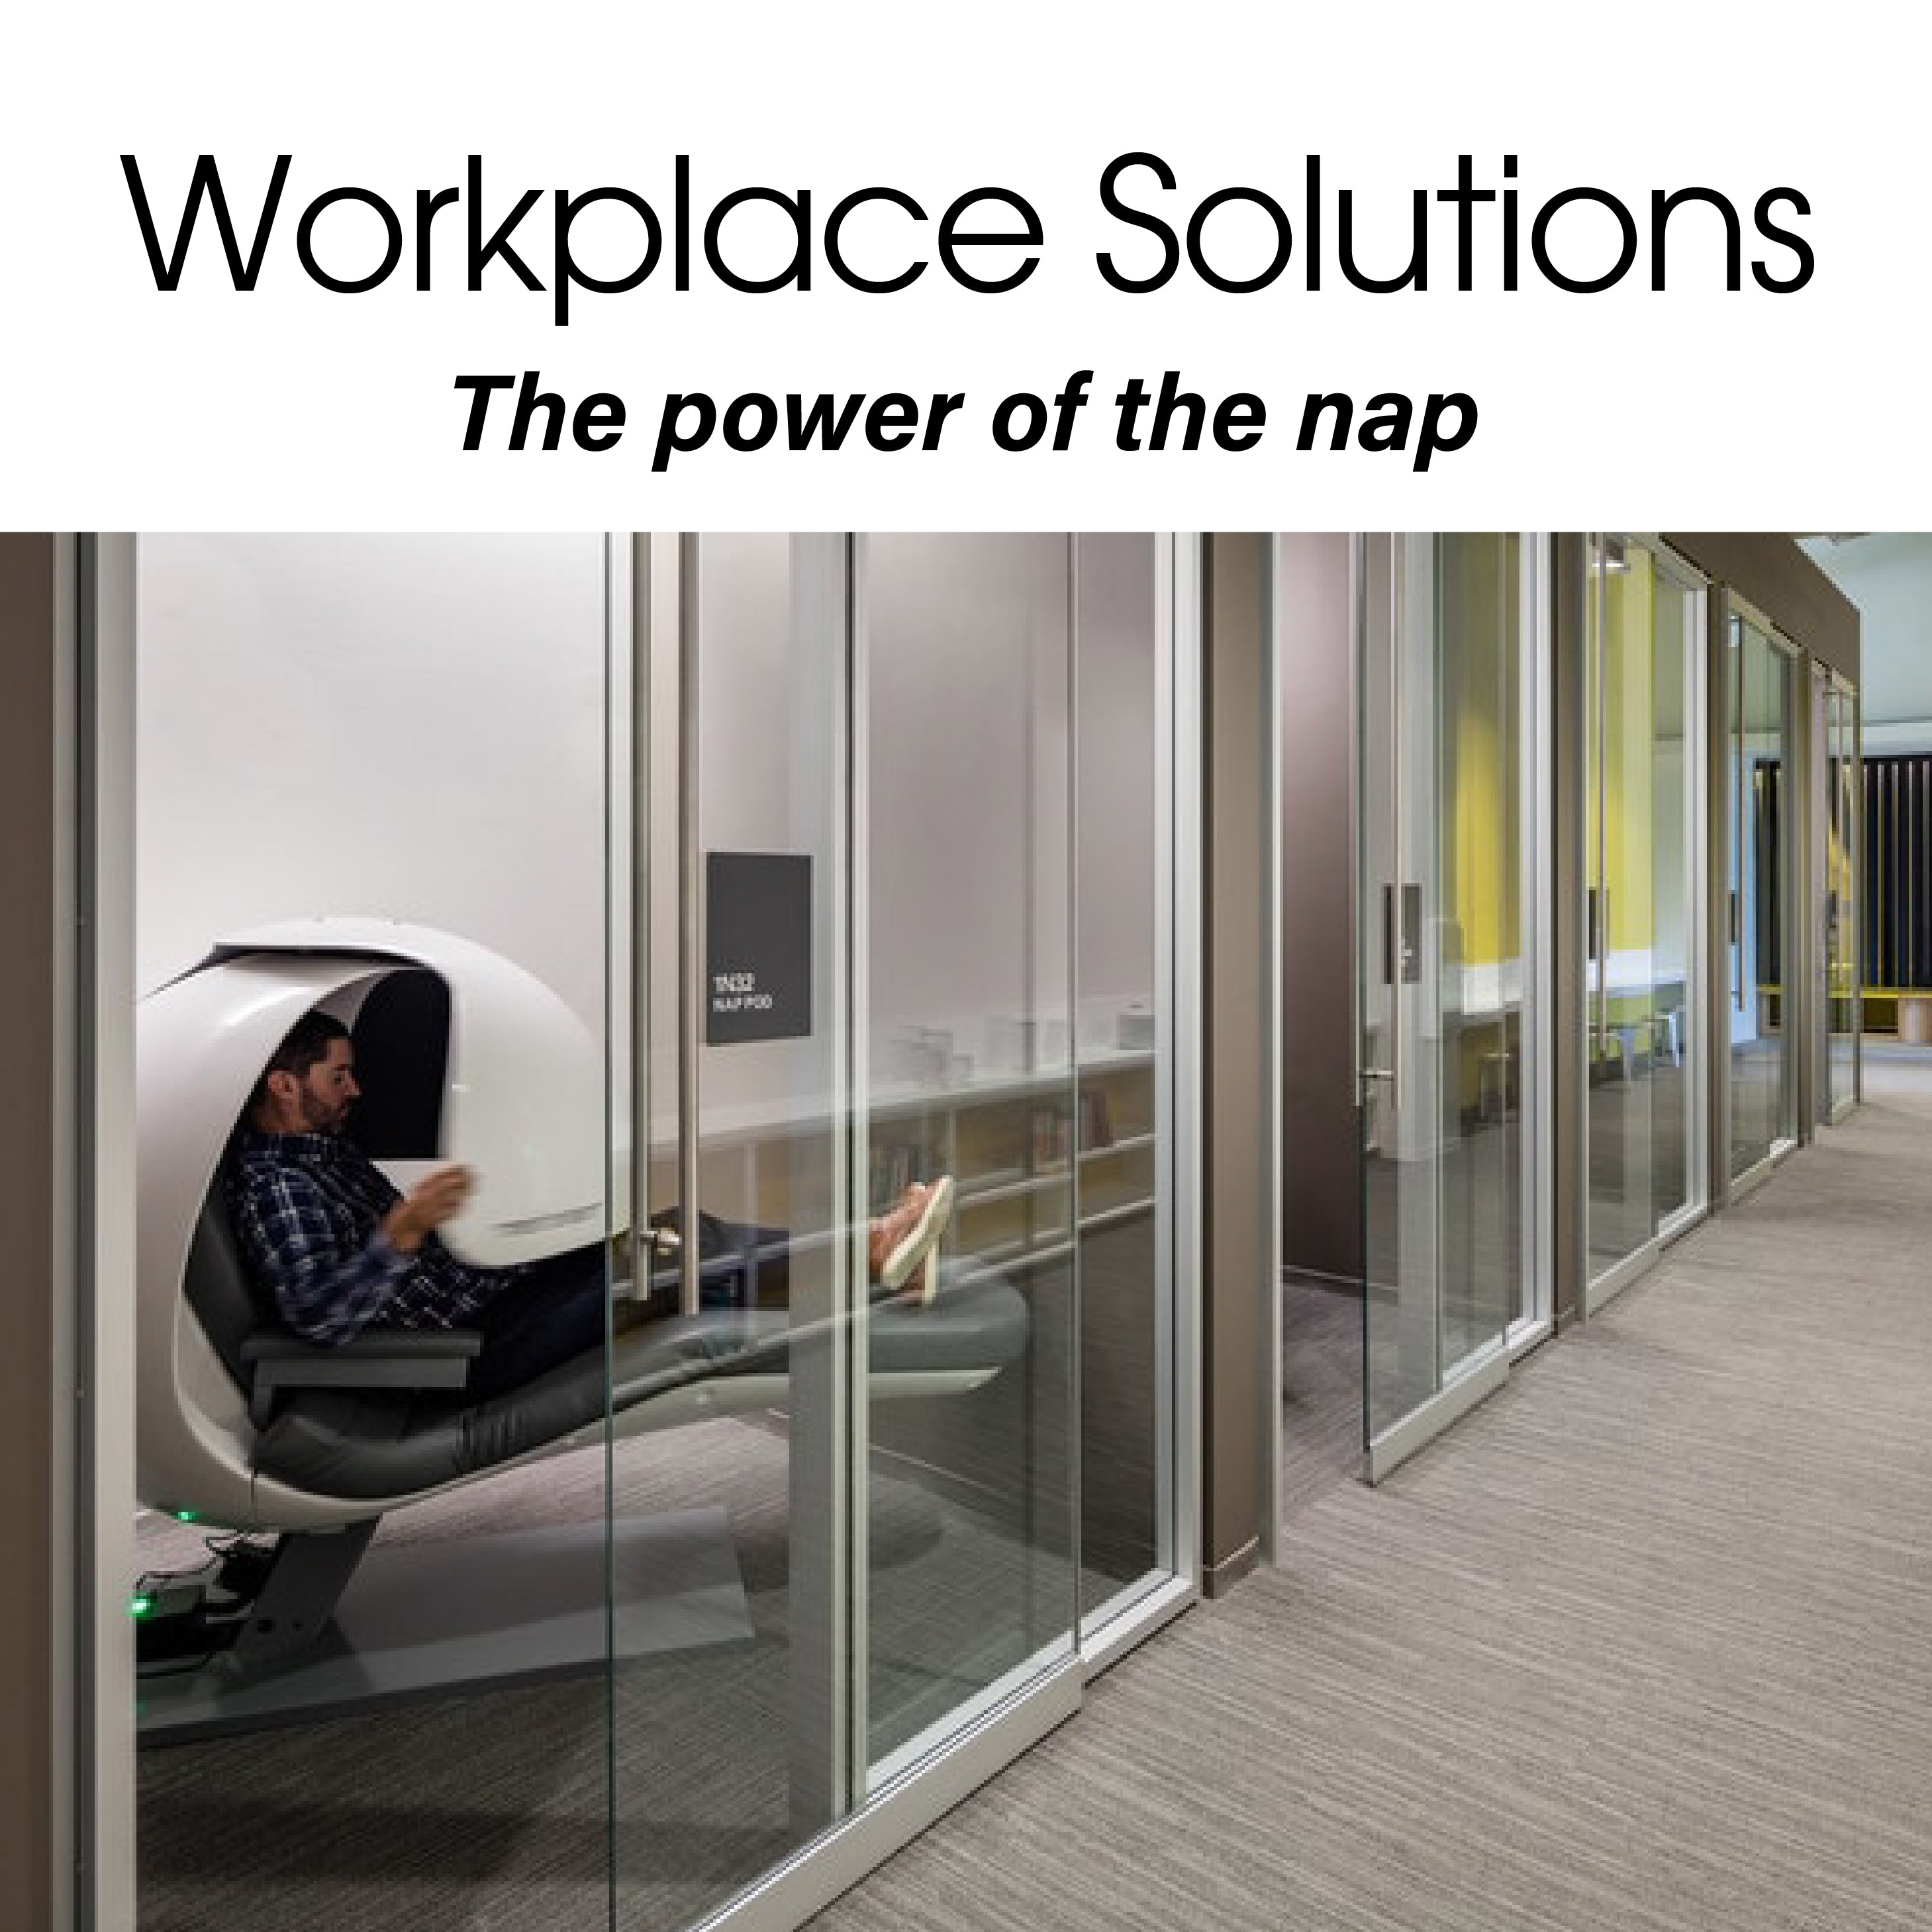 WORKPLACE SOLUTIONS | THE POWER OF THE NAP